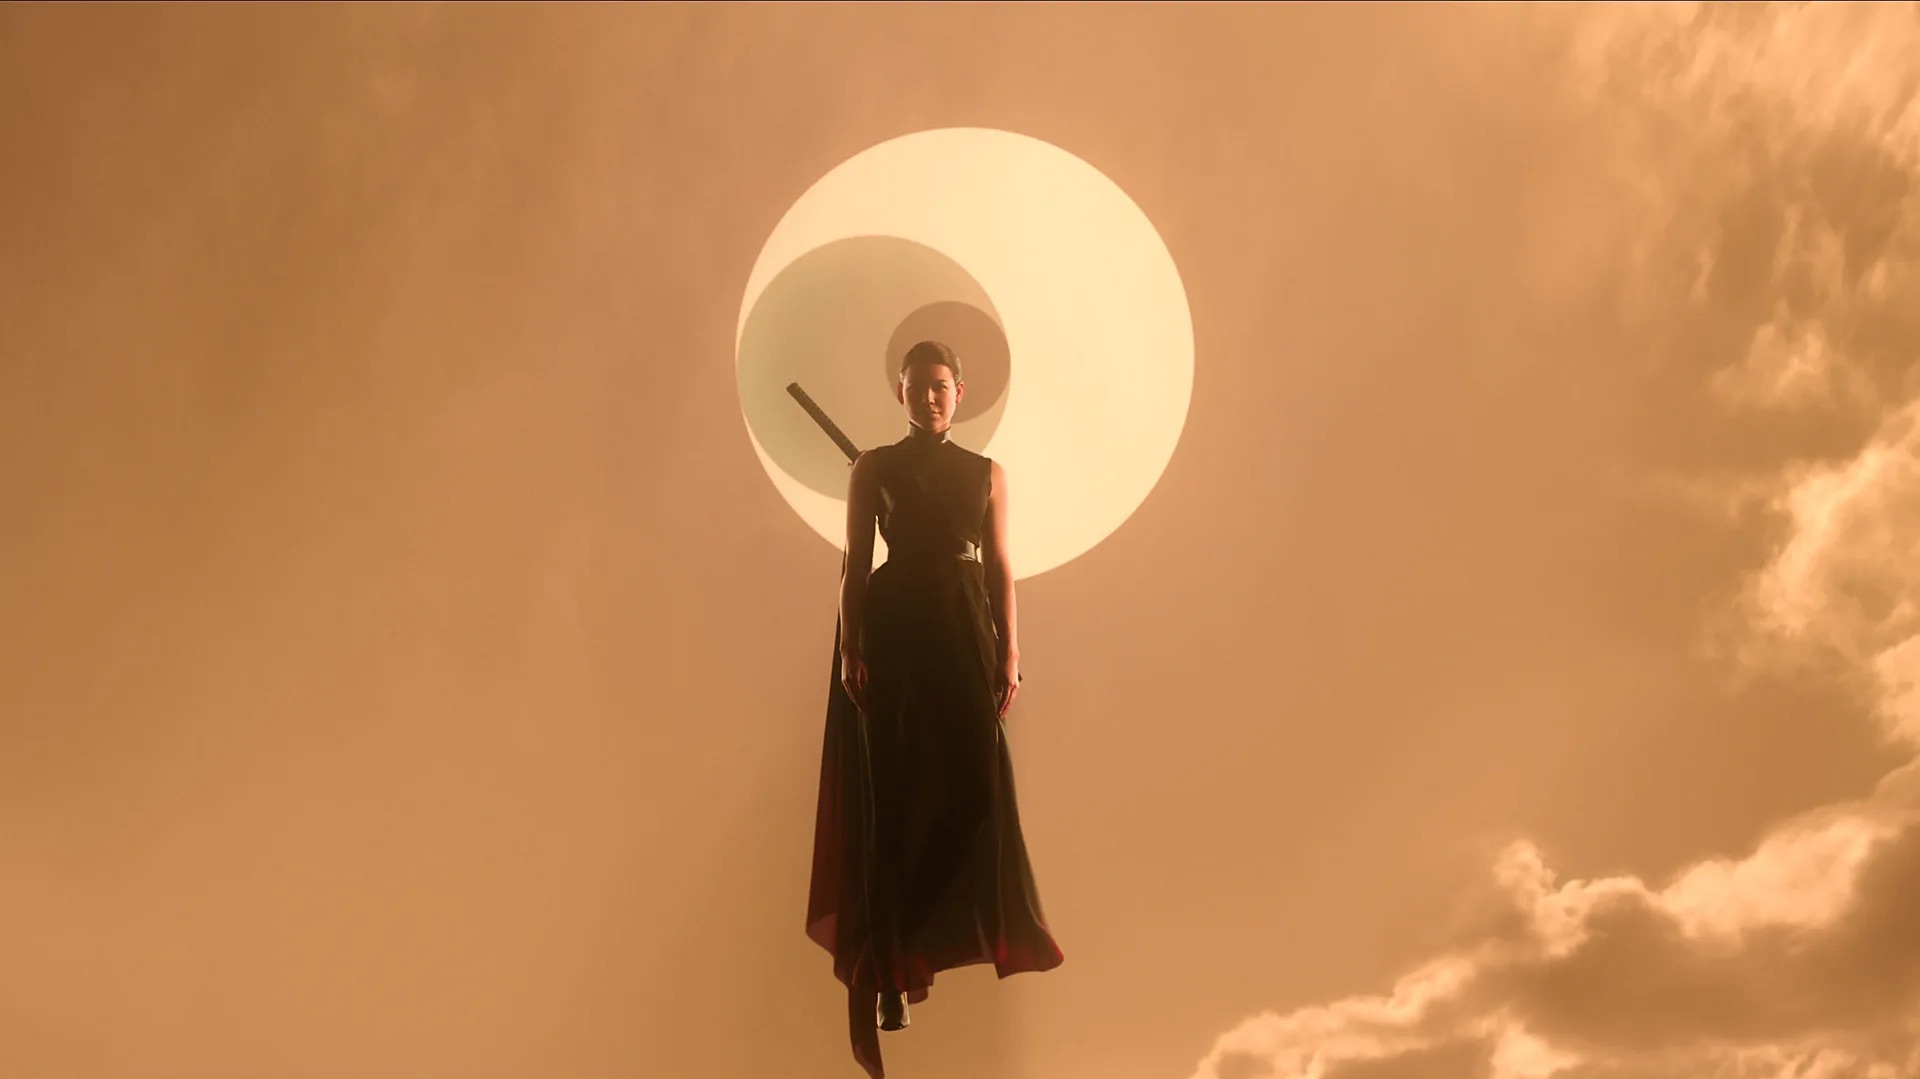 a woman wearing a forboding black dress with a sword against her back hovers against an orange sky in front of a simple graphic of three circles, each smaller than the next, enclosed in one another